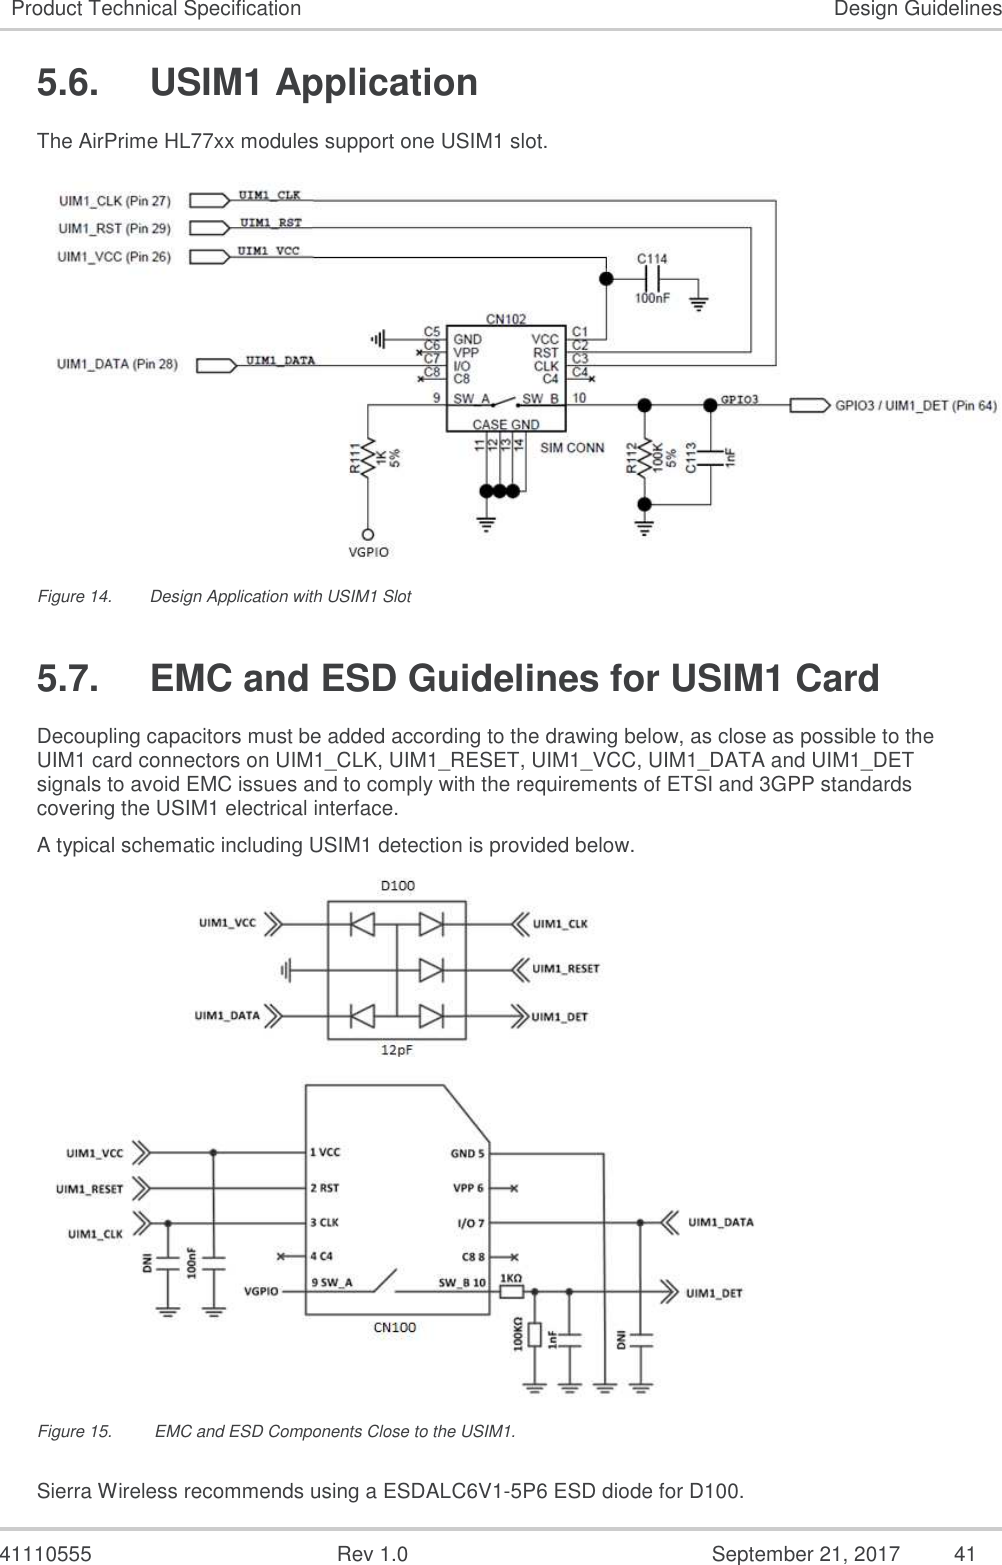   41110555  Rev 1.0  September 21, 2017  41 Product Technical Specification  Design Guidelines 5.6.  USIM1 Application The AirPrime HL77xx modules support one USIM1 slot.   Figure 14.  Design Application with USIM1 Slot 5.7.  EMC and ESD Guidelines for USIM1 Card Decoupling capacitors must be added according to the drawing below, as close as possible to the UIM1 card connectors on UIM1_CLK, UIM1_RESET, UIM1_VCC, UIM1_DATA and UIM1_DET signals to avoid EMC issues and to comply with the requirements of ETSI and 3GPP standards covering the USIM1 electrical interface. A typical schematic including USIM1 detection is provided below.  Figure 15.   EMC and ESD Components Close to the USIM1. Sierra Wireless recommends using a ESDALC6V1-5P6 ESD diode for D100. 